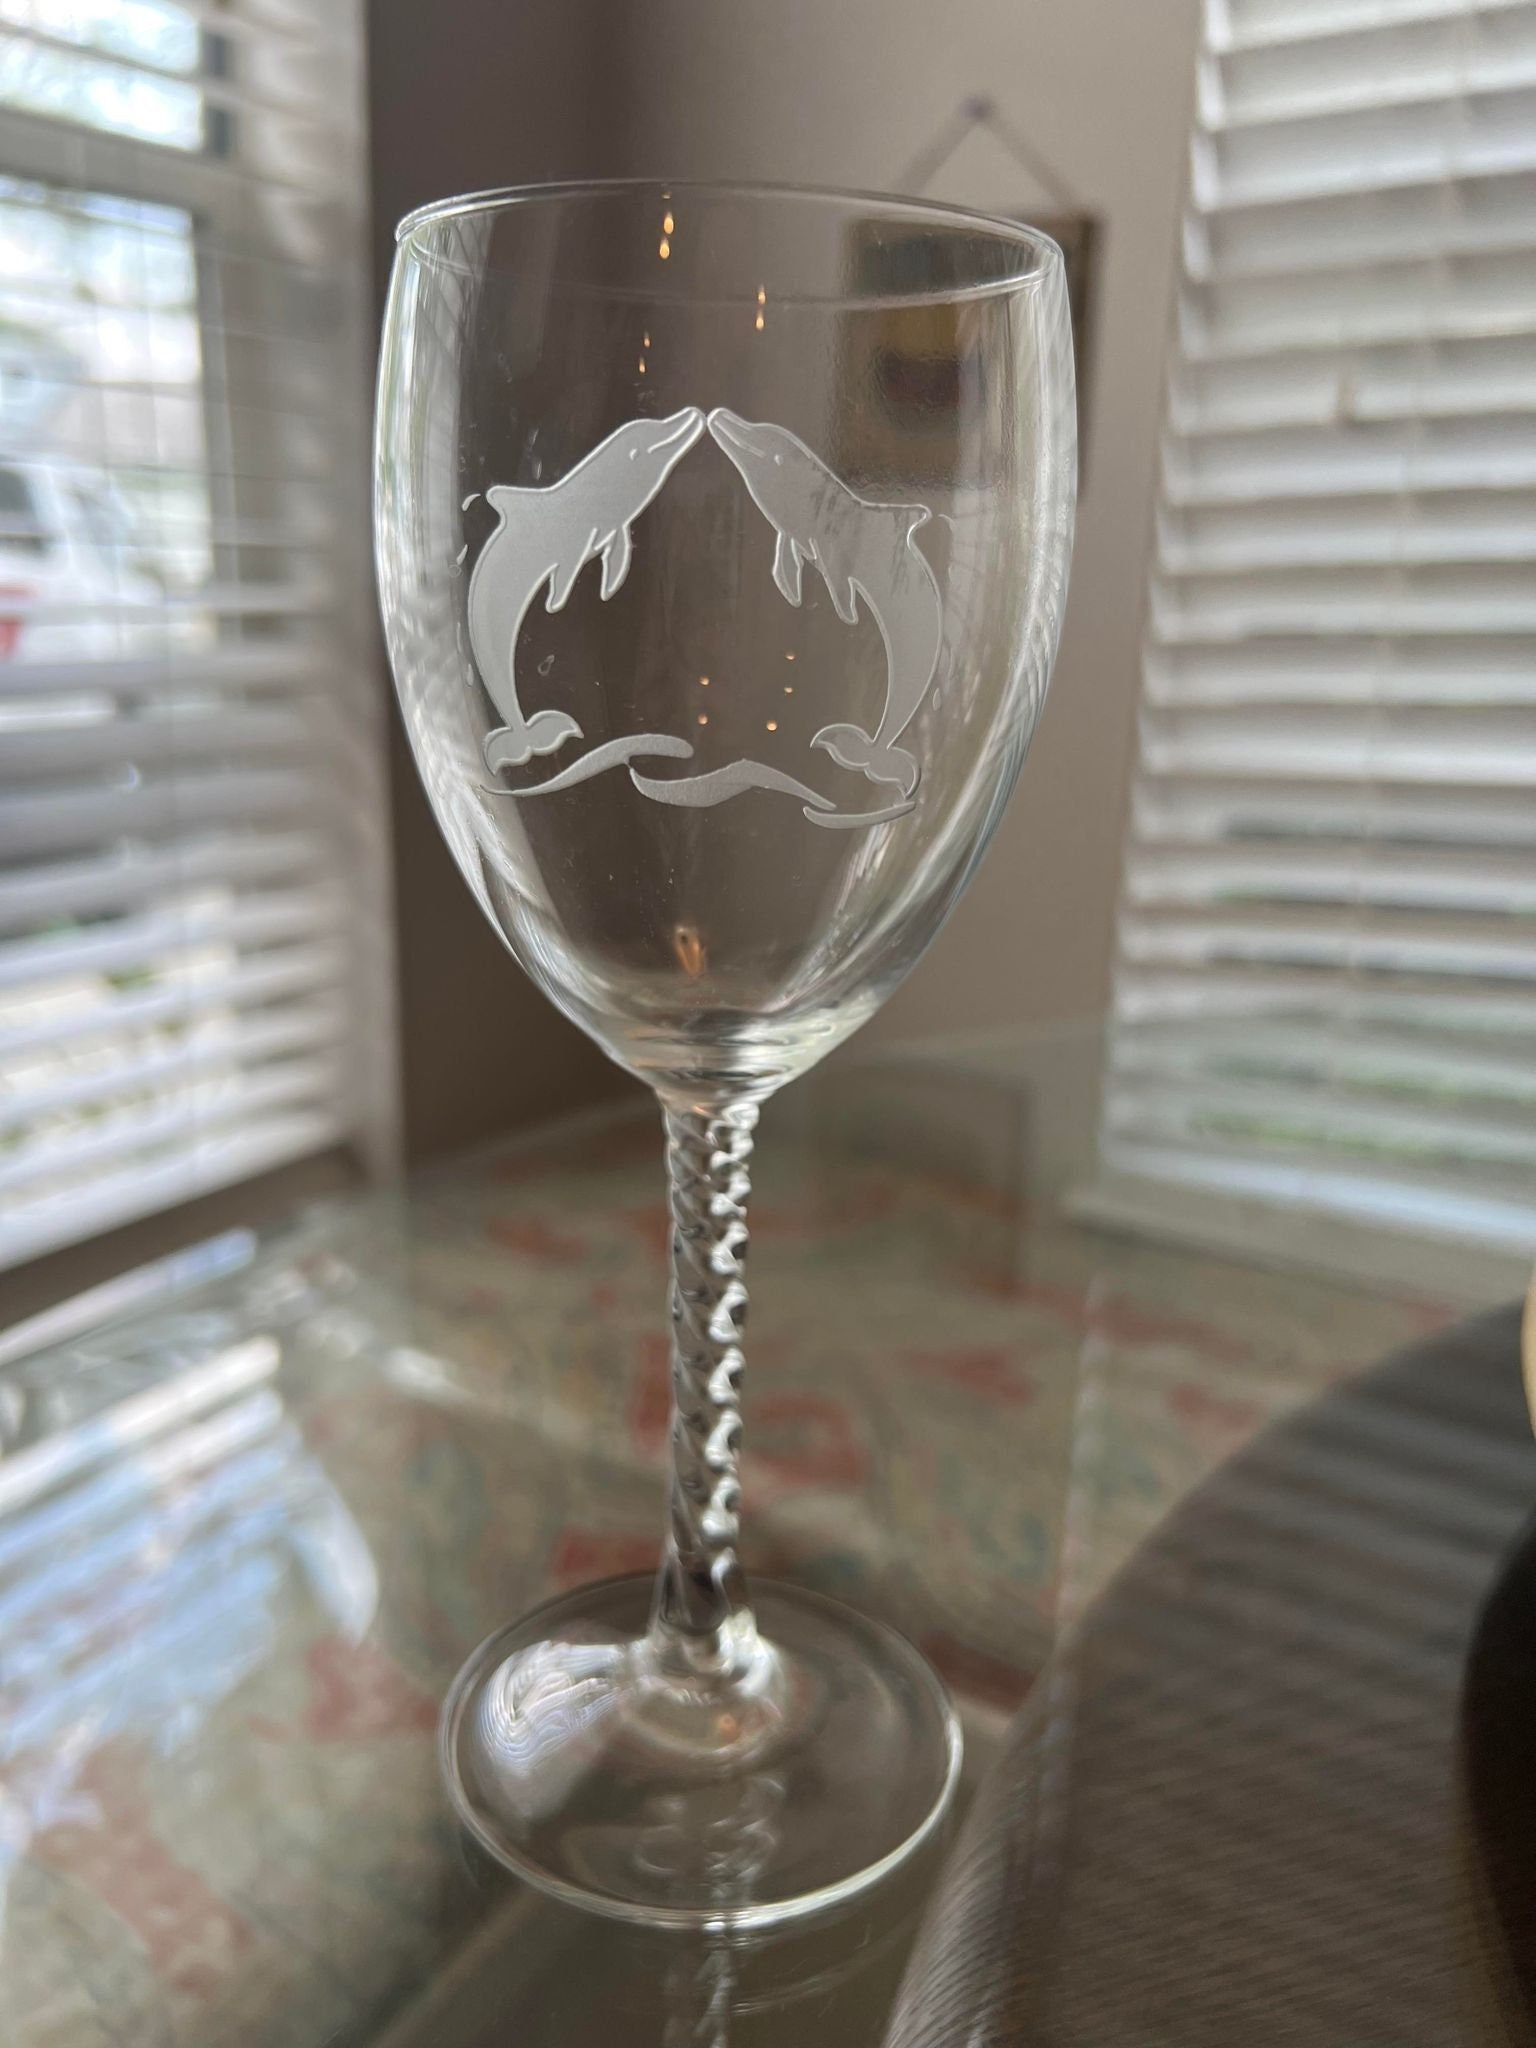 Stemless Wine Glass with Dolphins Inside, 16 OZ Large Capacity Unique Wine  Glasses with 3D Dolphins …See more Stemless Wine Glass with Dolphins